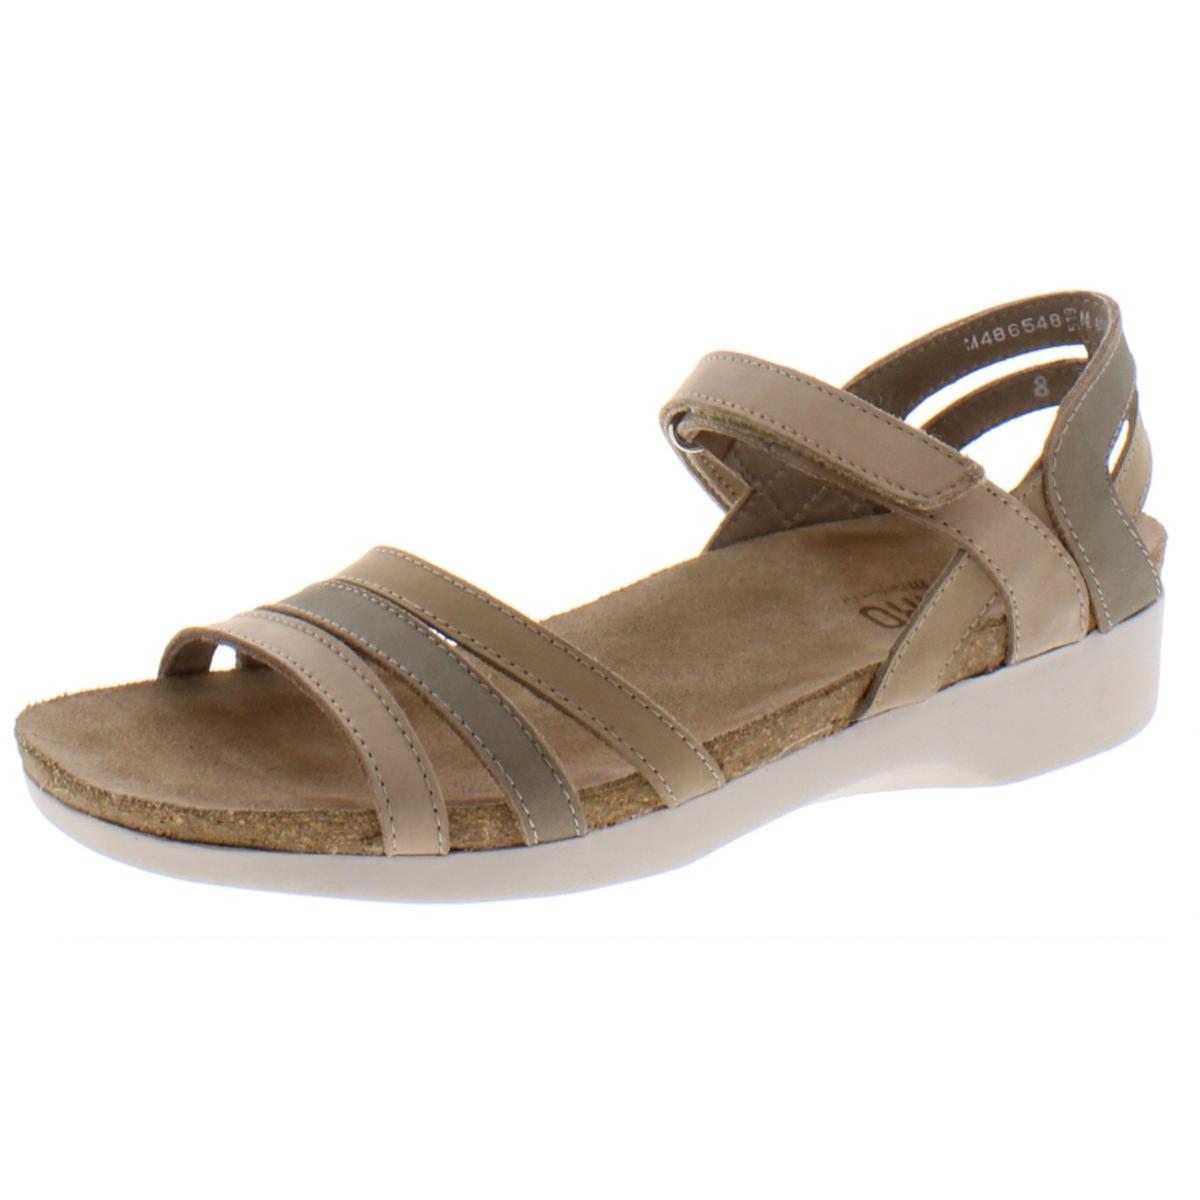 Munro Womens Summer Taupe Cork Footbed Sandals Shoes 8 Narrow (AA,N ...